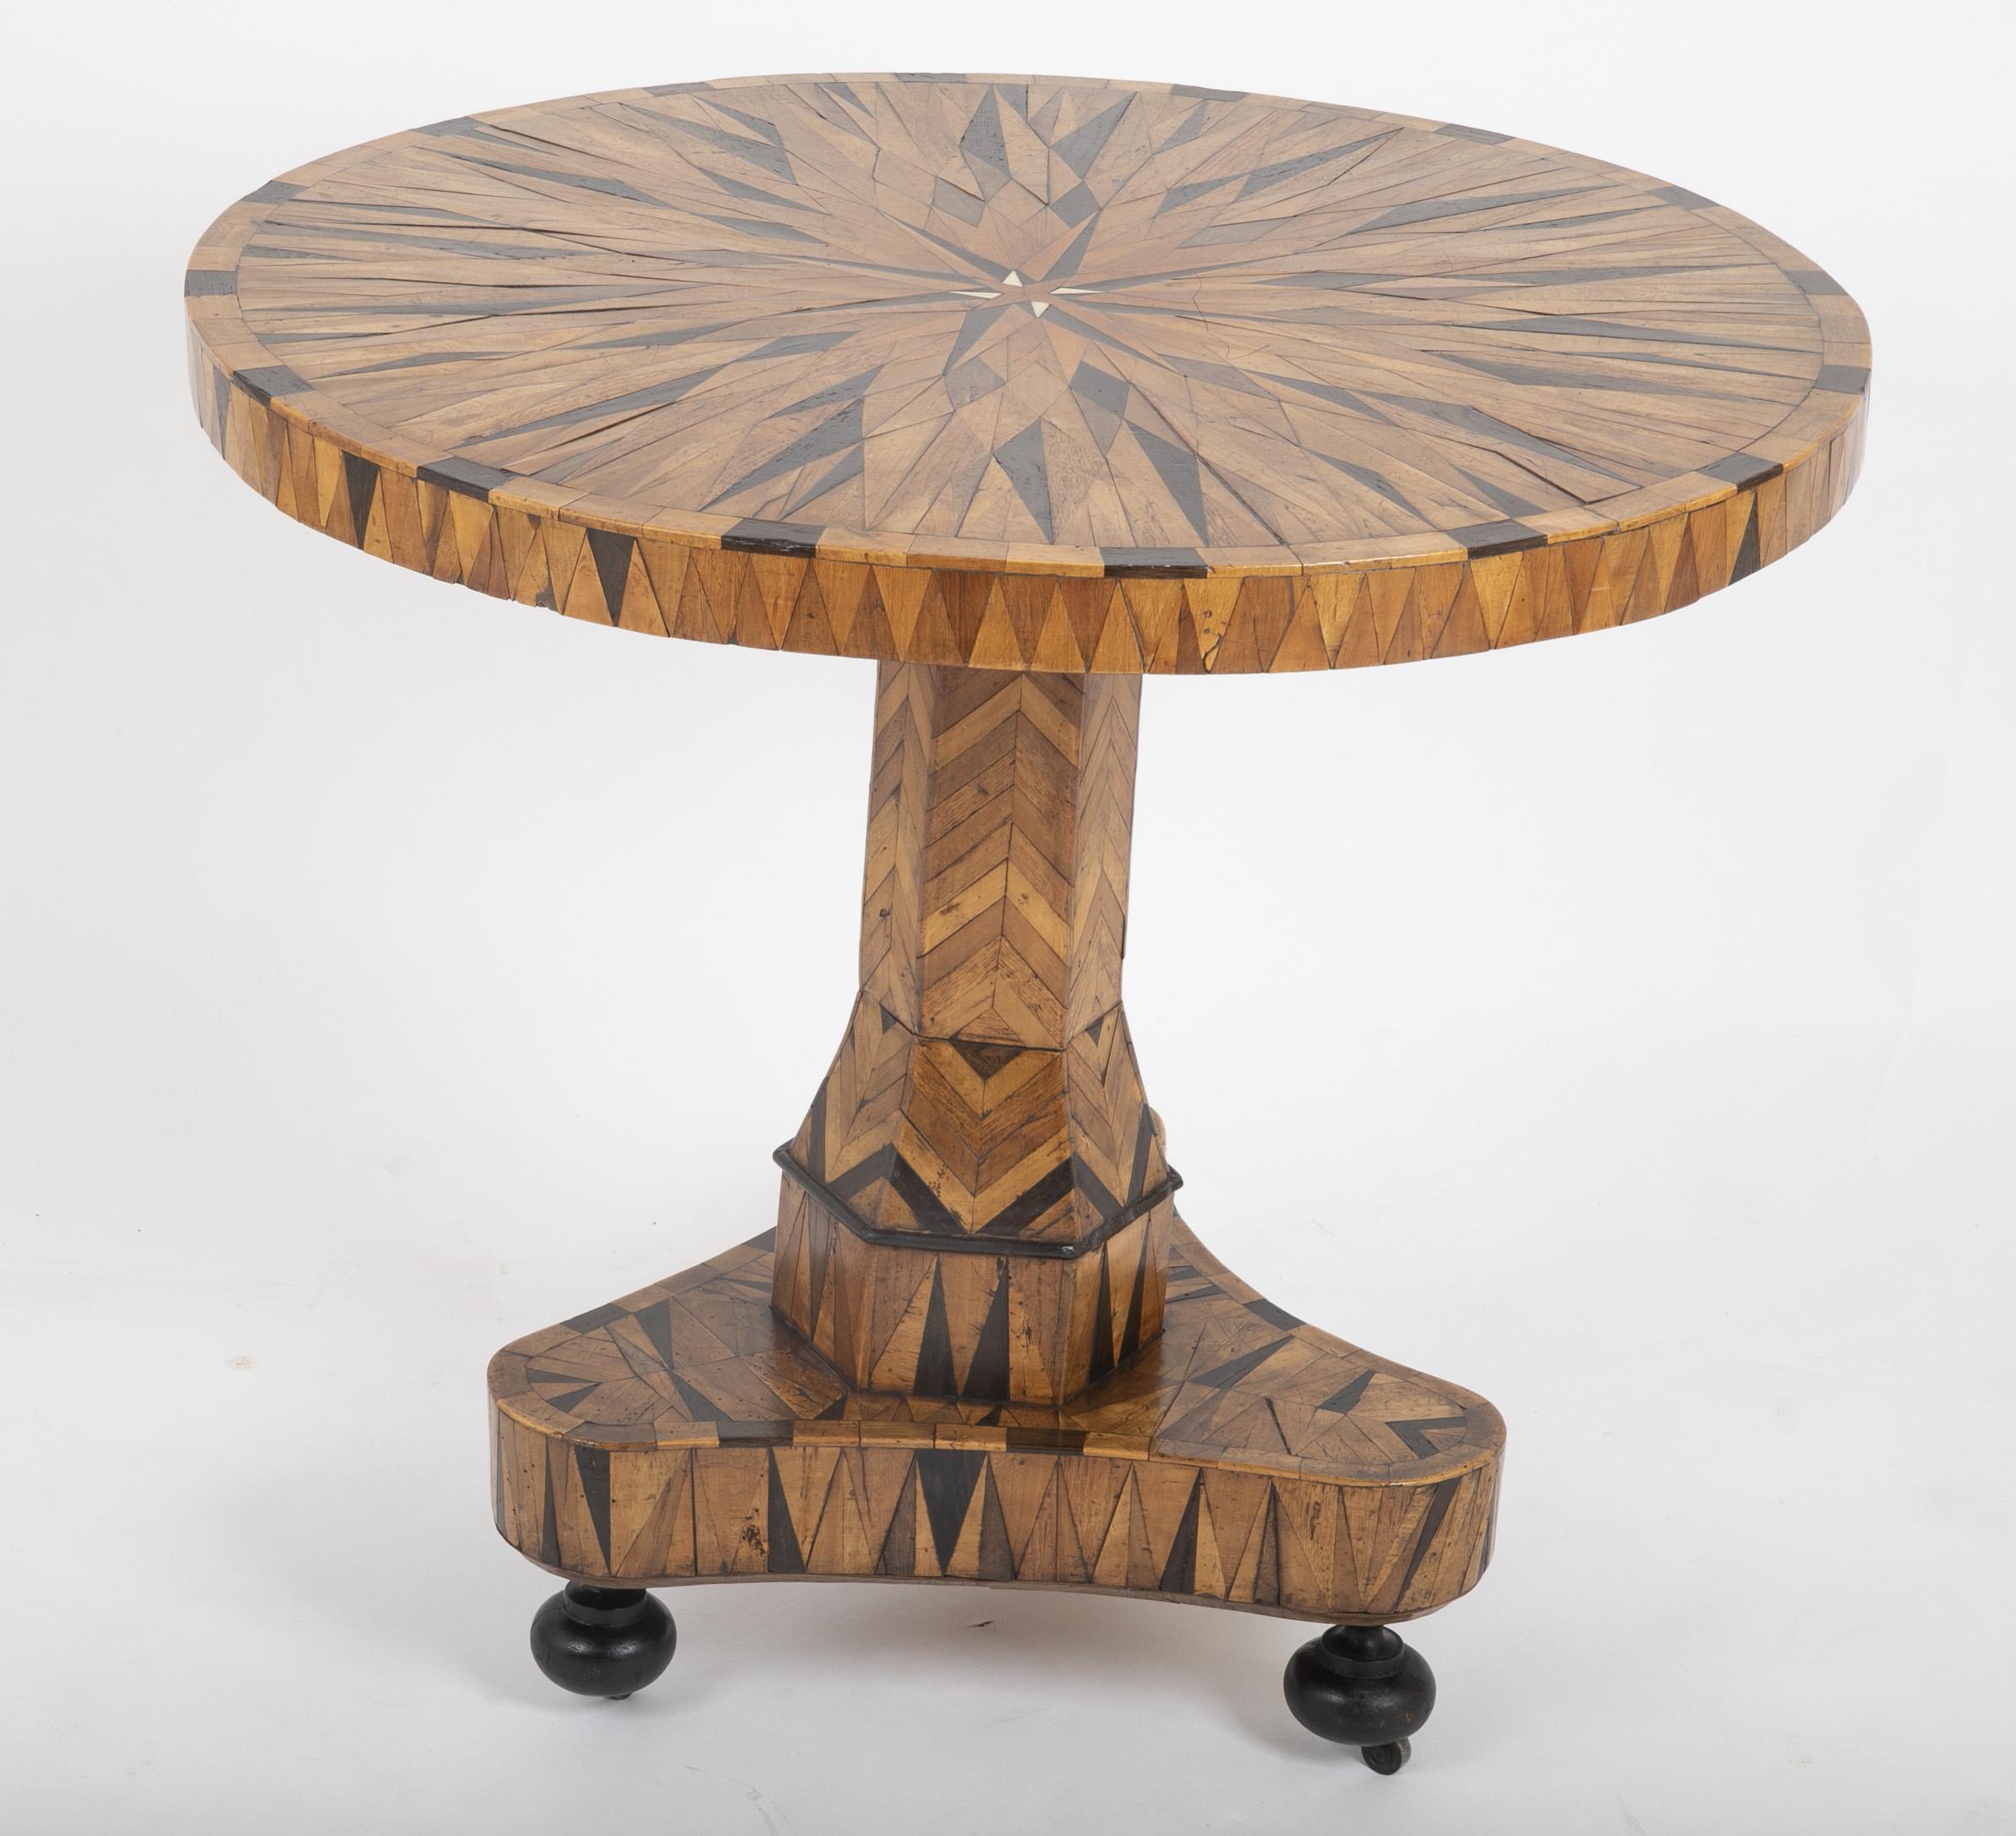 A beautifully patinated parquetry table consisting of oak, rosewood and Wenge. Continental, first quarter of the 19th century.